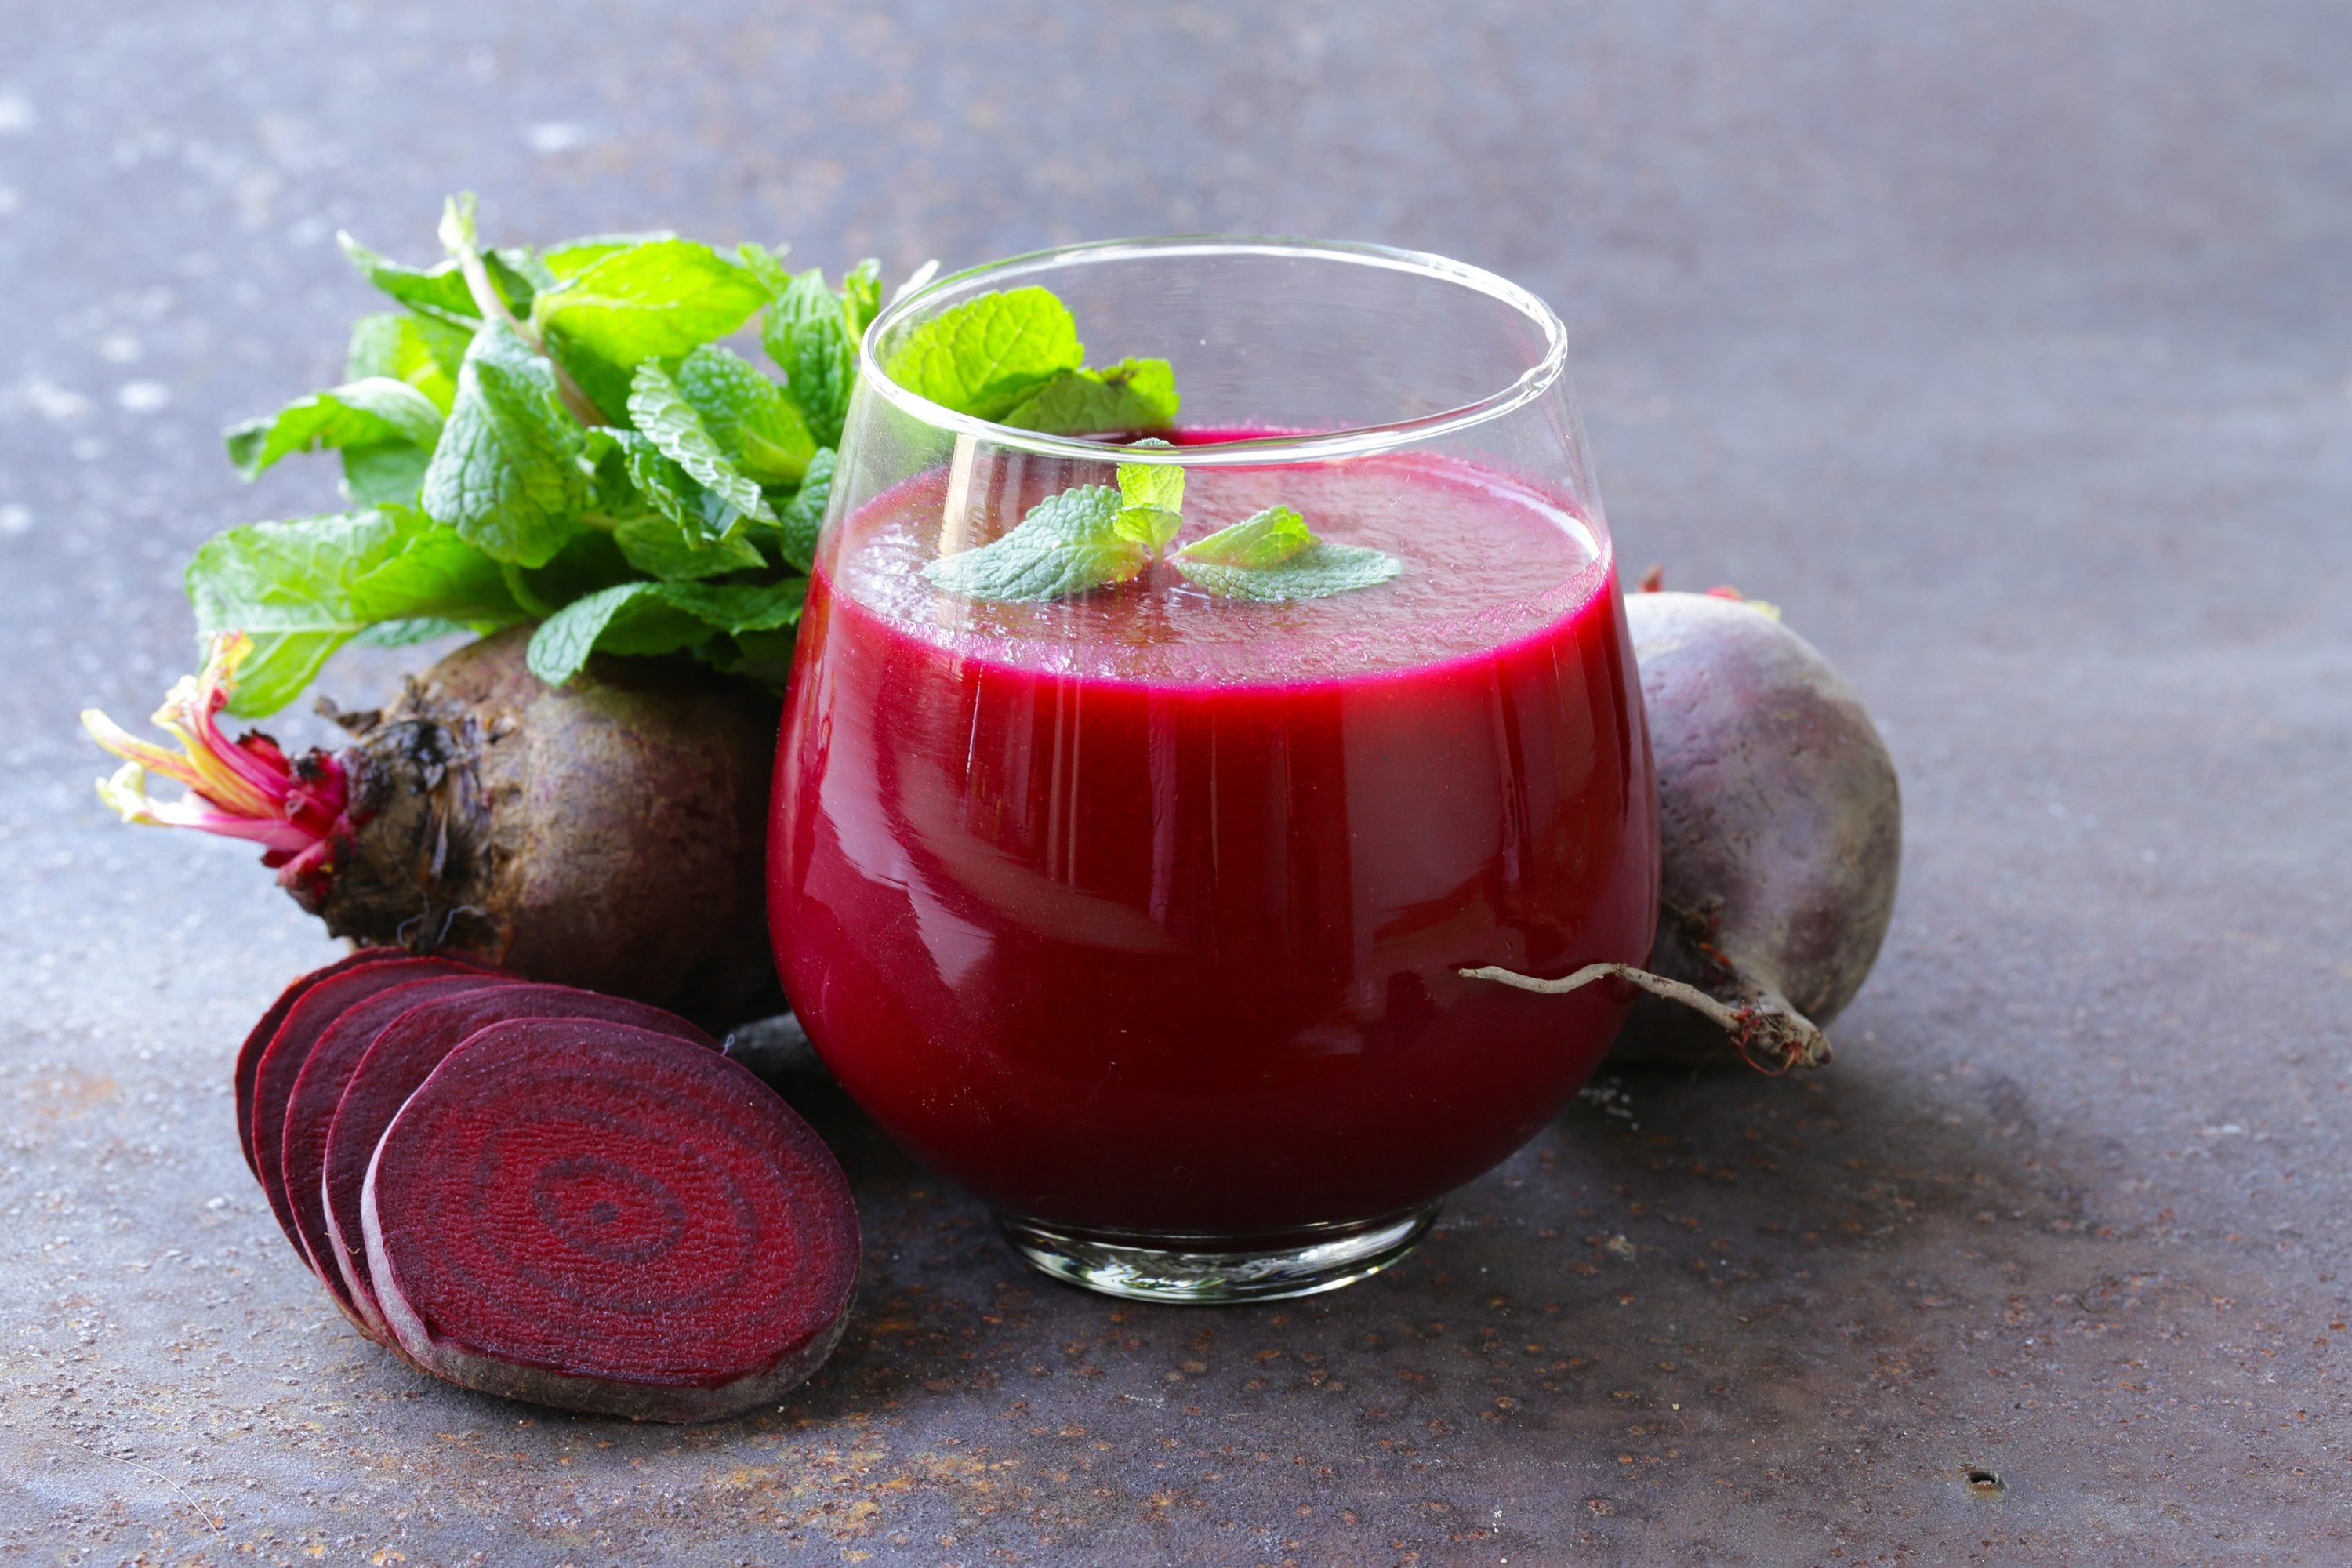 Some endurance athletes swear by beet juice to boost performance.